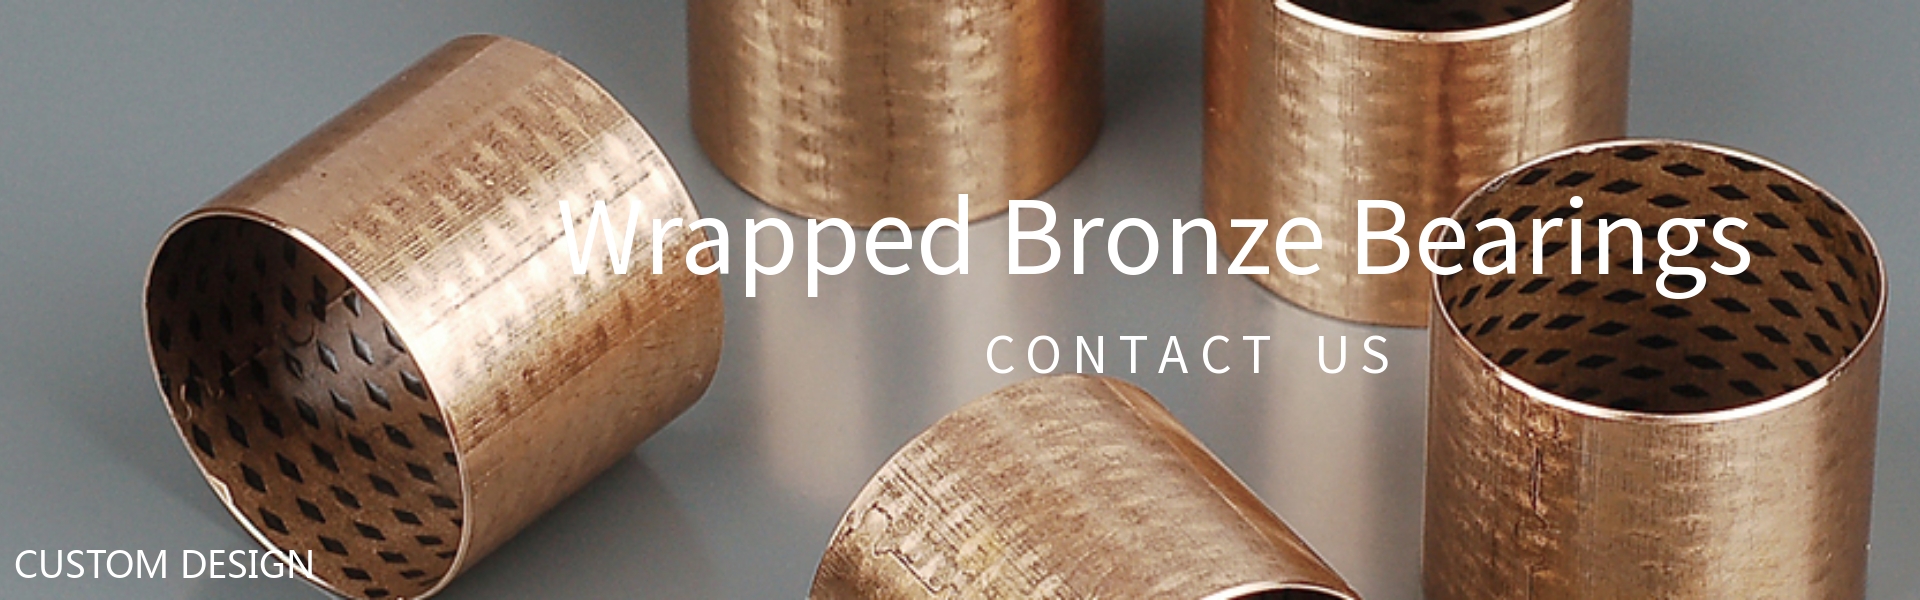 Wrapped Bronze Bearings banner